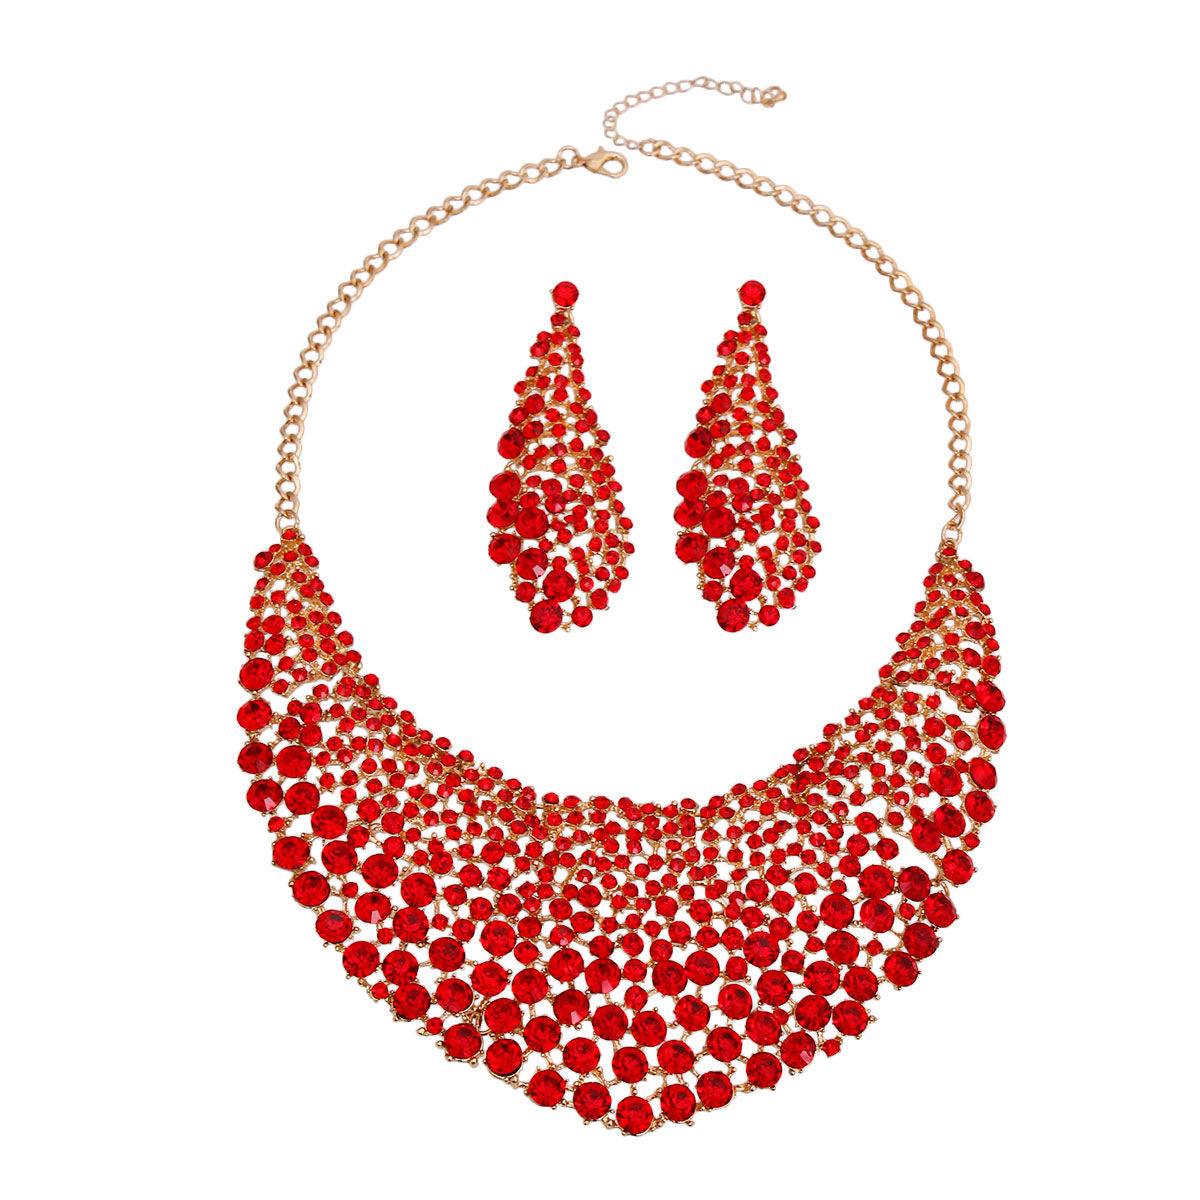 Stunning Round Cut Red Crystal Necklace Earrings Set